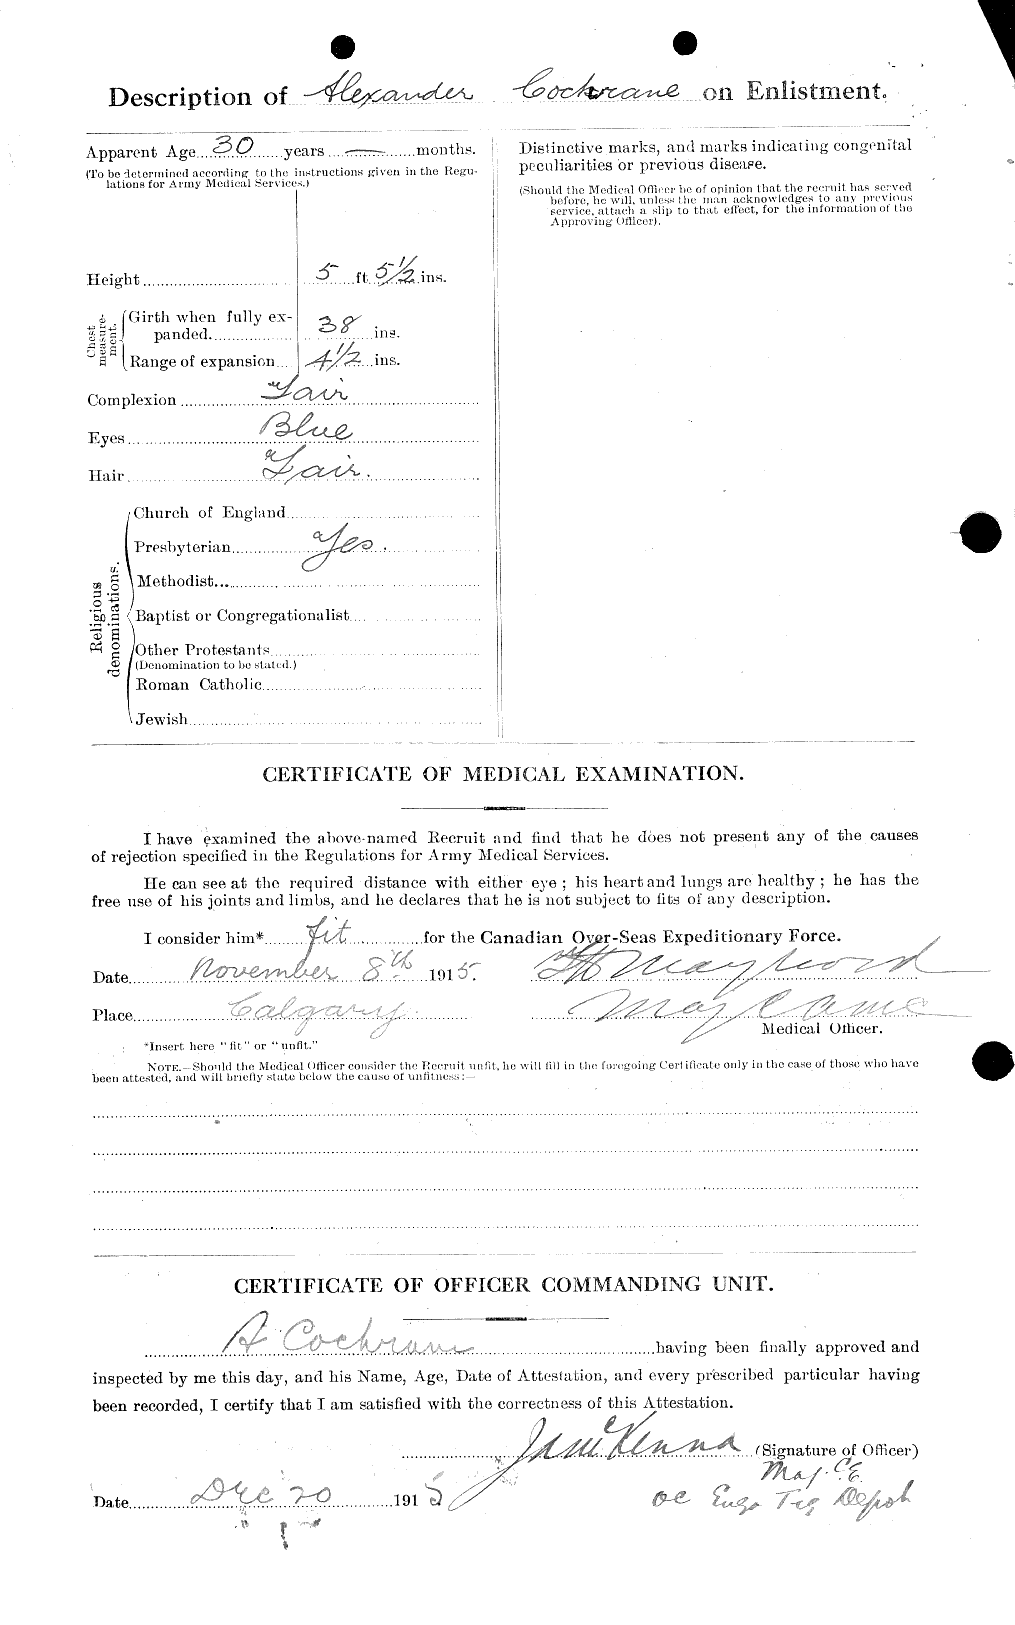 Personnel Records of the First World War - CEF 025821b